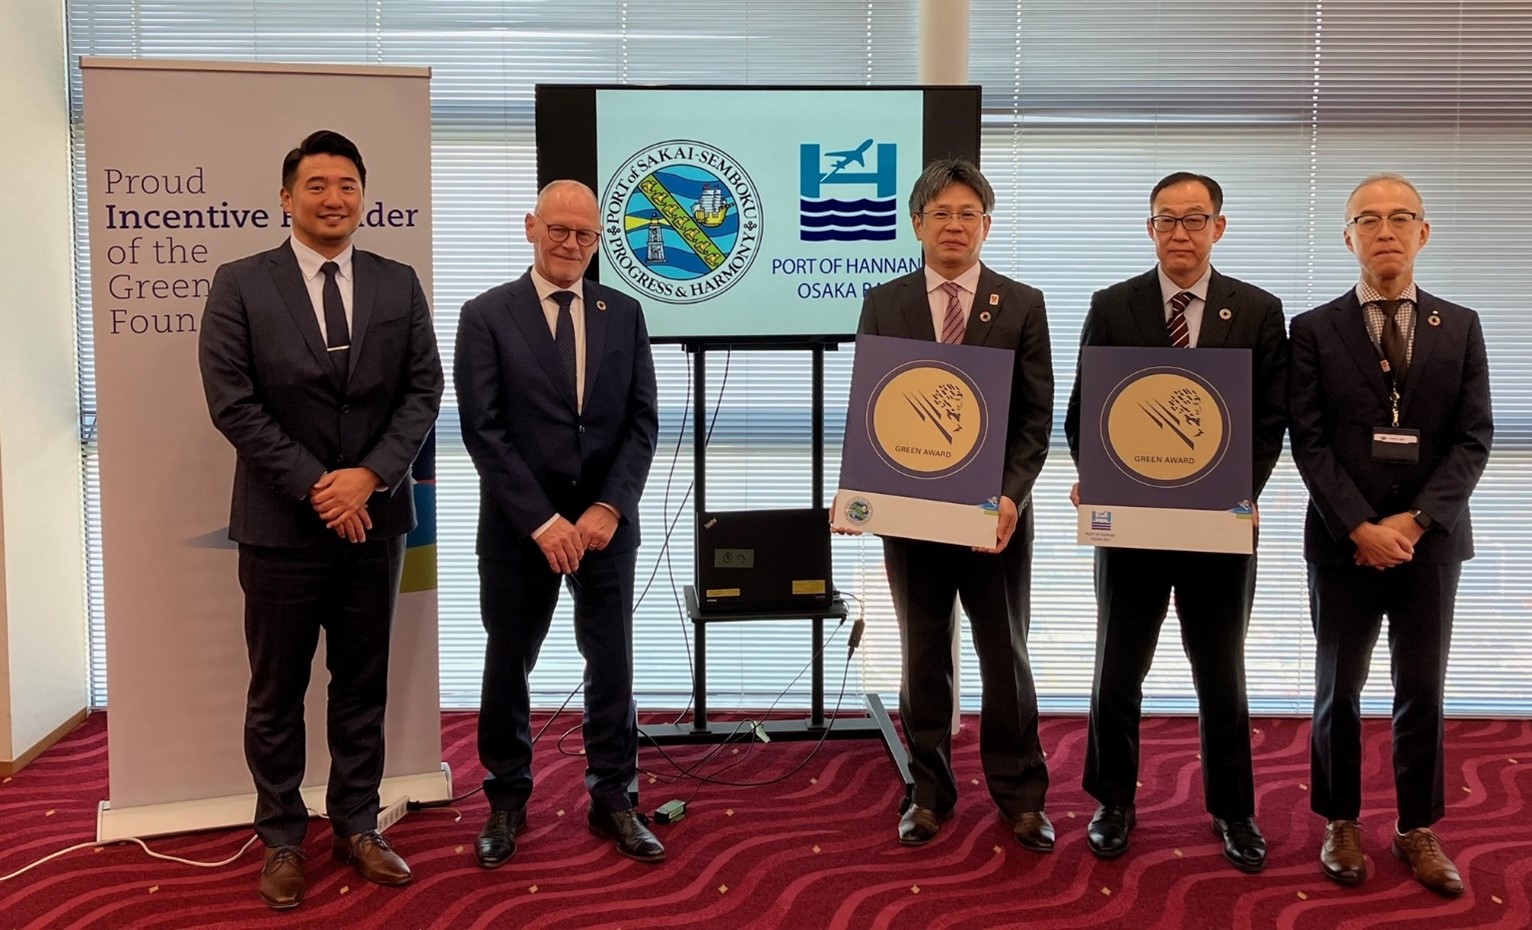 The Green Award welcomes 8 New Japanese ports, Expa